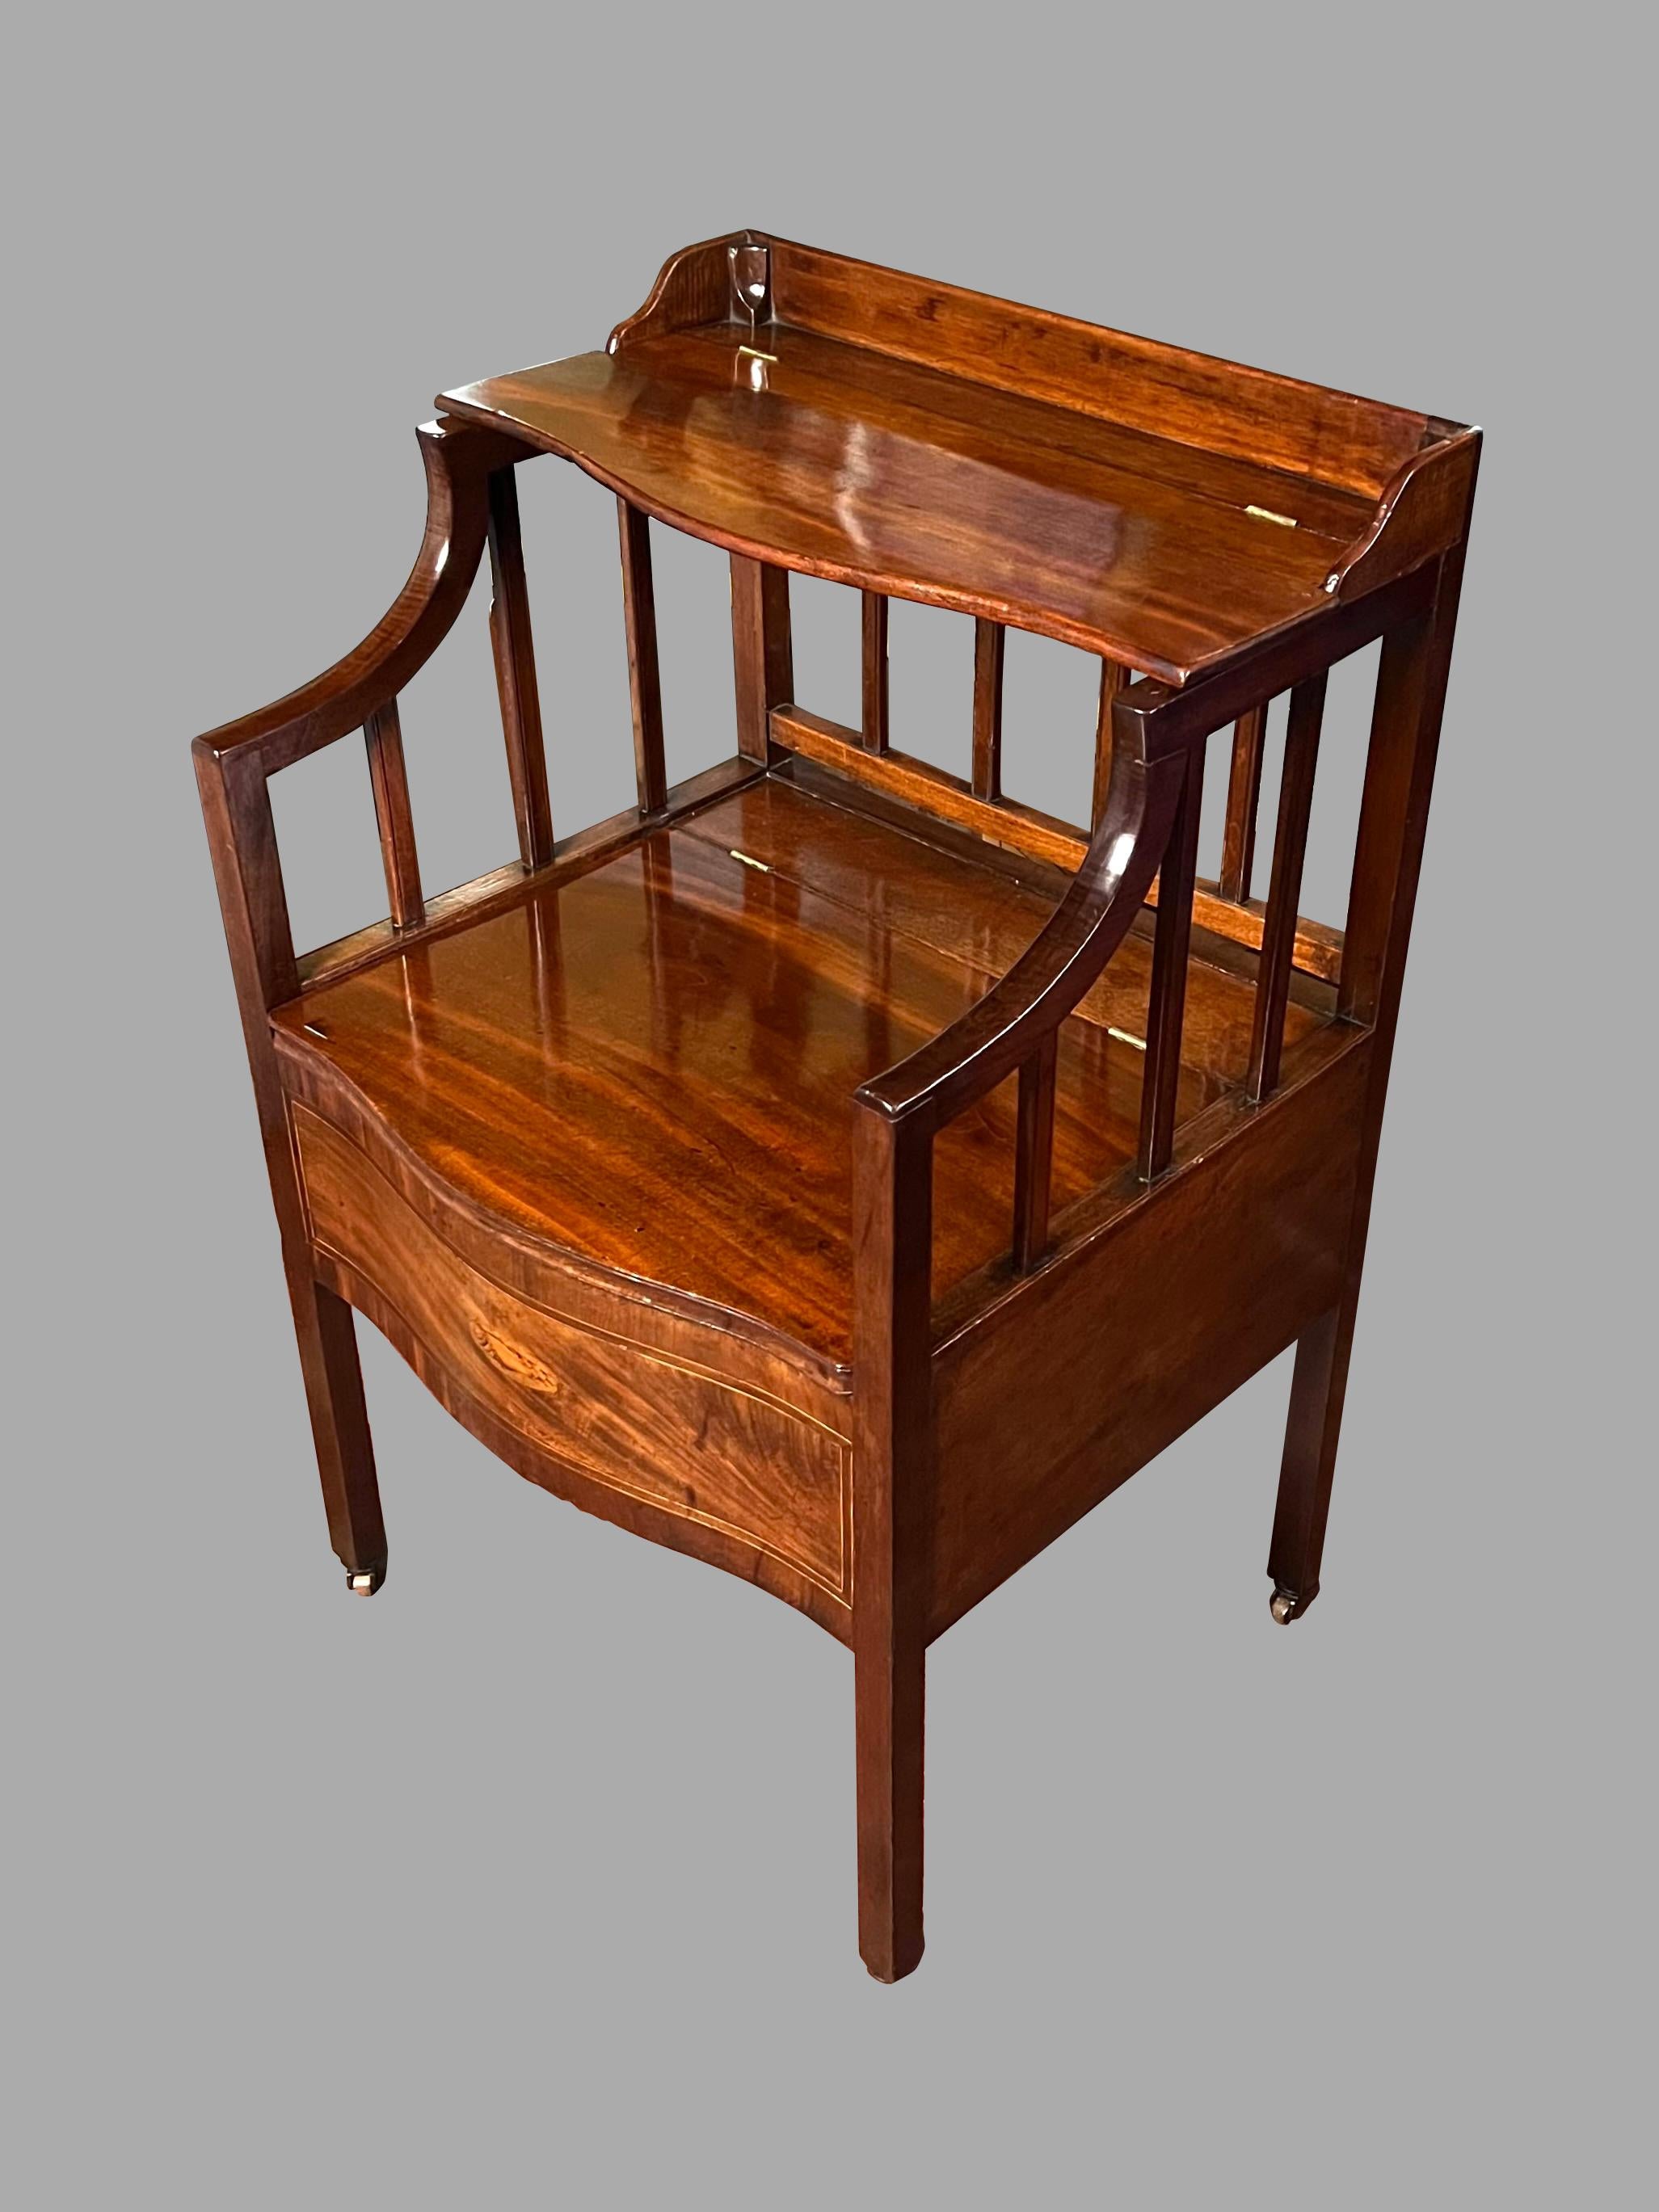 English George III Period Inlaid Mahogany Serpentine Form Bedside Commode In Good Condition For Sale In San Francisco, CA